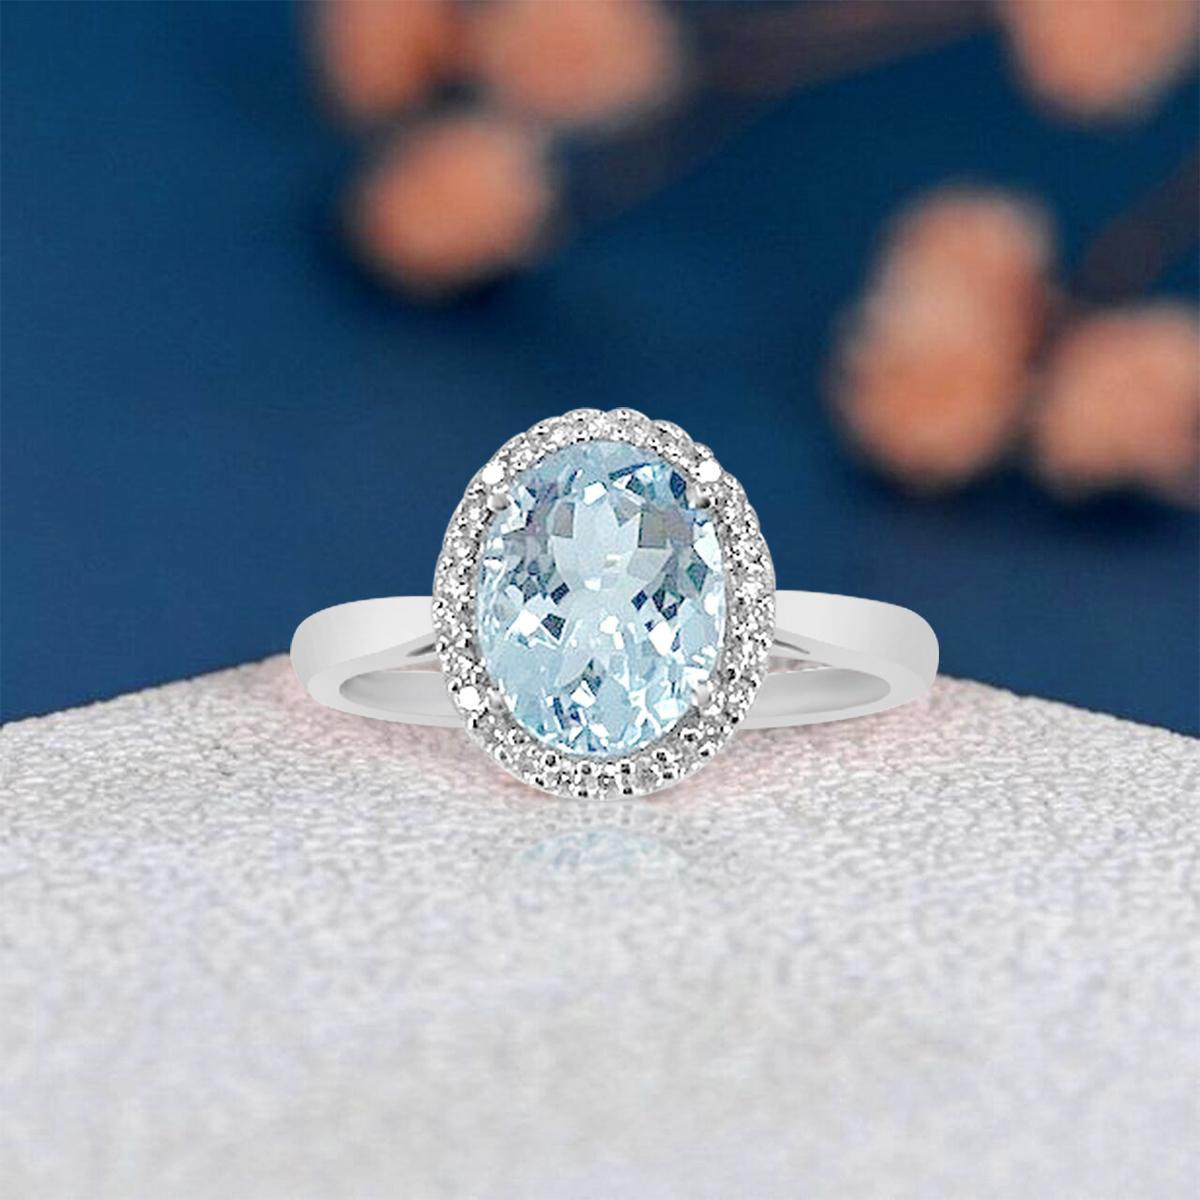 14K White Gold 1.74cts Aquamarine and Diamond Ring, Style# TS1030AQR In New Condition For Sale In New York, NY